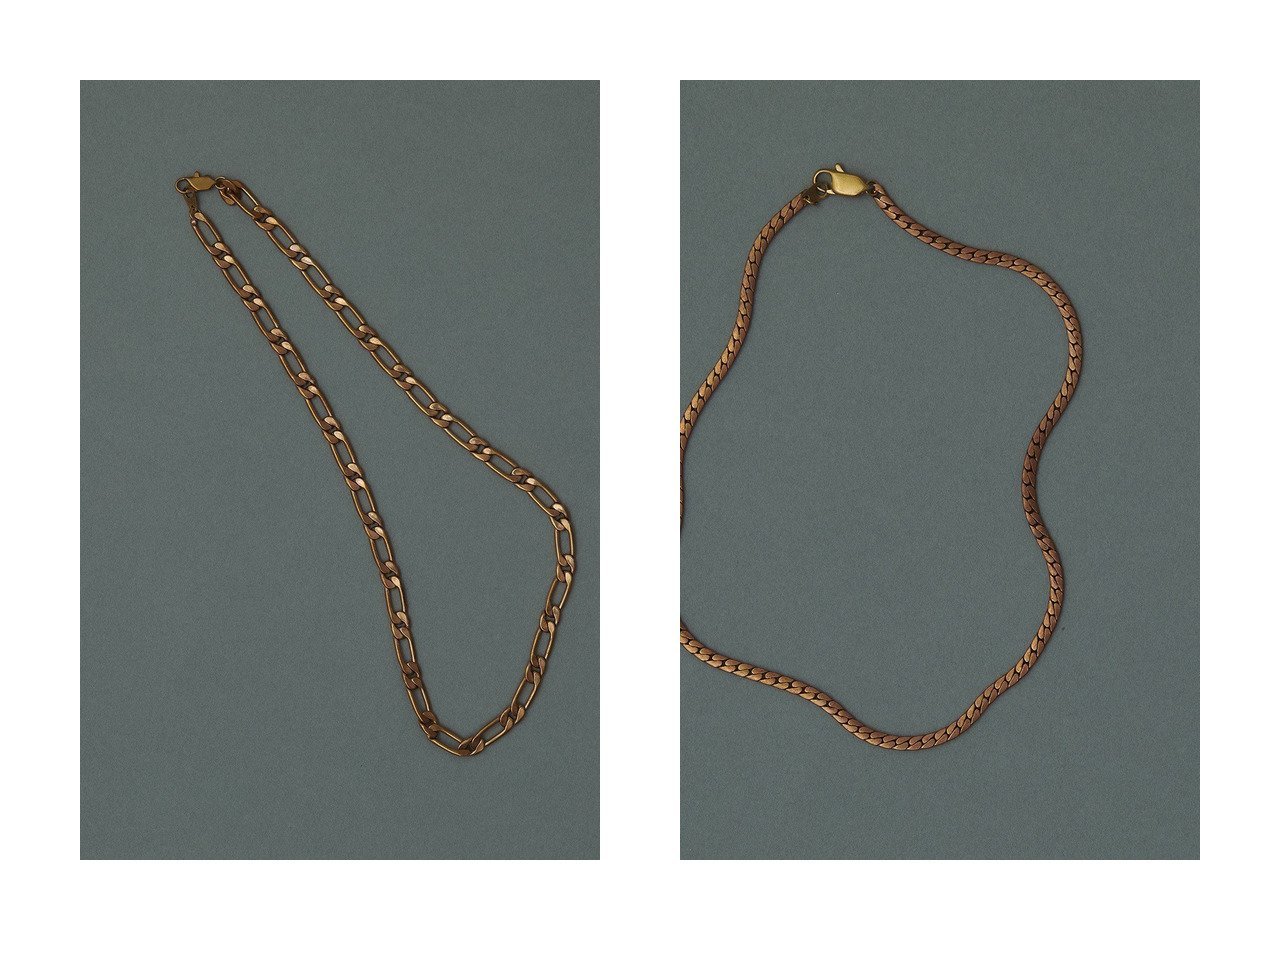 【Adlin Hue/アドリン ヒュー】のVintage Curb Chain Necklace&Vintage Flat Woven Snake Chain Necklace 【アクセサリー】おすすめ！人気、トレンド、レディースファッションの通販  おすすめ人気トレンドファッション通販アイテム インテリア・キッズ・メンズ・レディースファッション・服の通販 founy(ファニー) 　ファッション　Fashion　レディースファッション　WOMEN　ジュエリー　Jewelry　ネックレス　Necklaces　おすすめ　Recommend　ジュエリー　チェーン　ネックレス　ヴィンテージ　再入荷　Restock/Back in Stock/Re Arrival　シルバー系　Silver　|ID:crp329100000121204